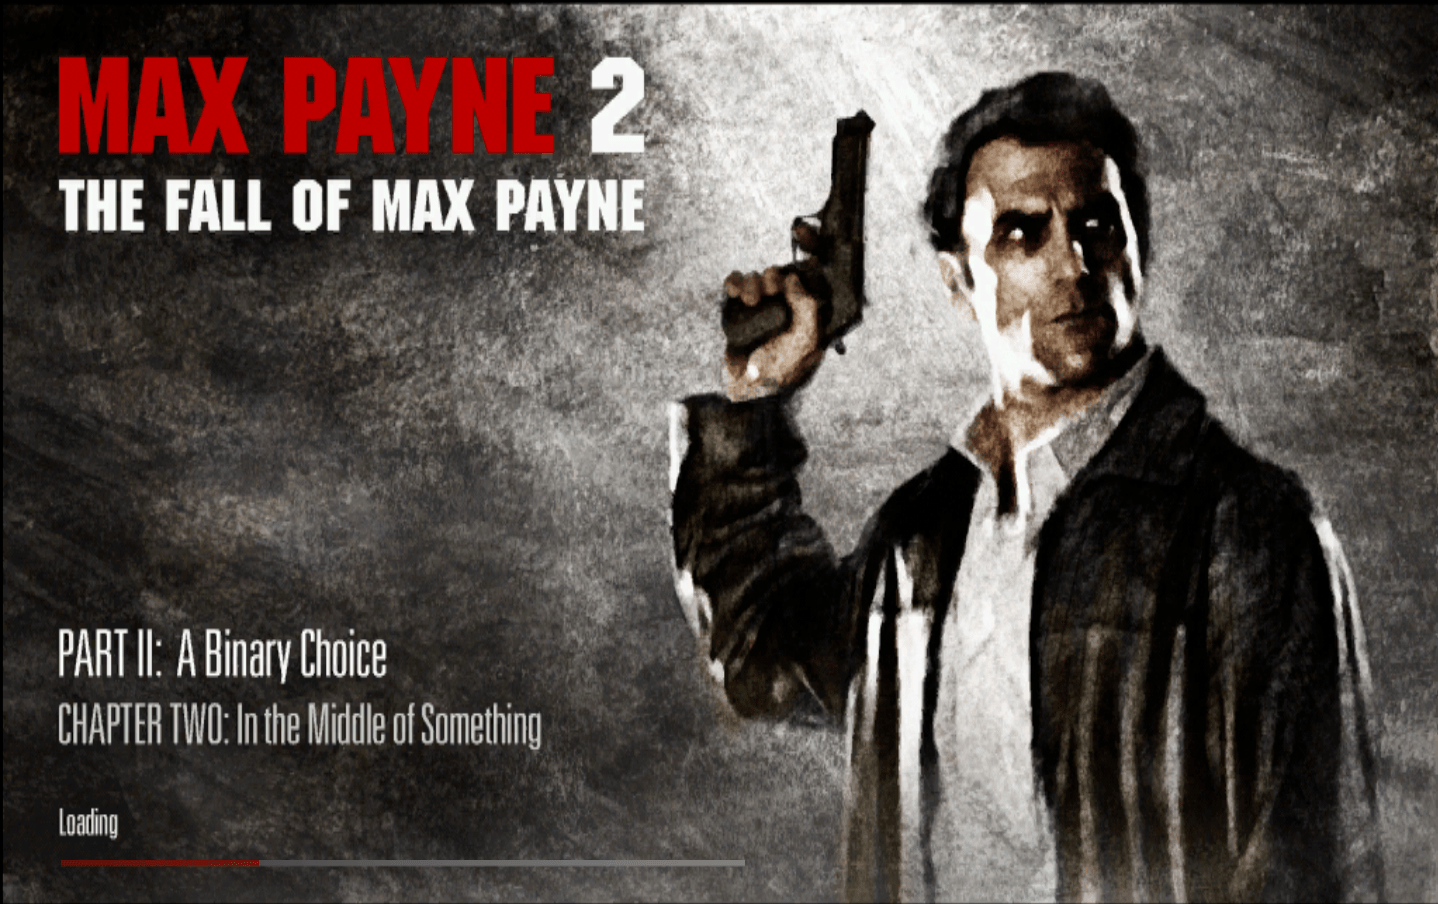 In the Middle of Something, Max Payne Wiki